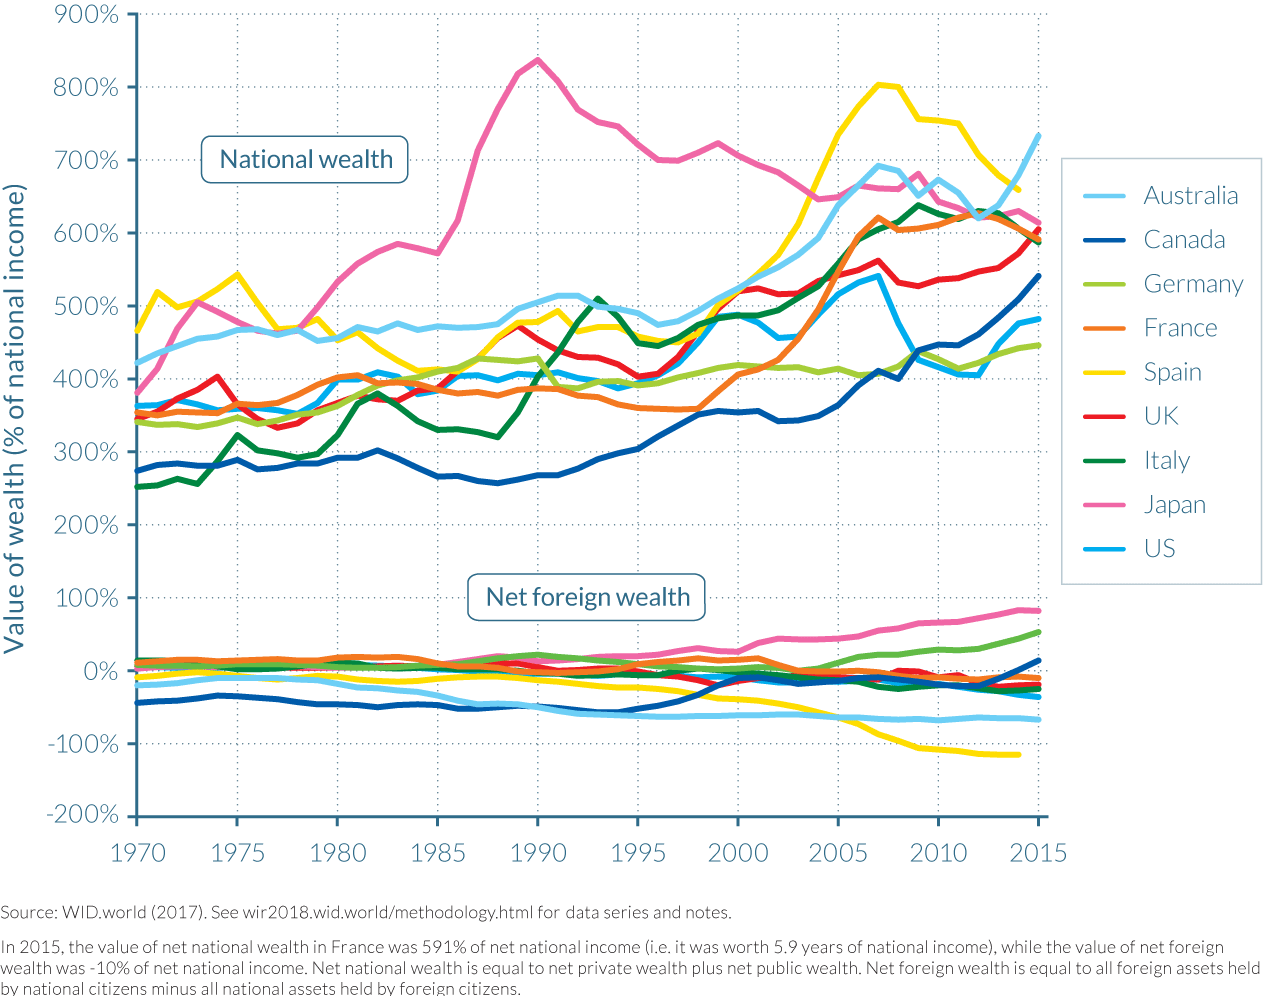 Figure 3.2.1 Net national and net foreign wealth in rich countries, 1970–2015